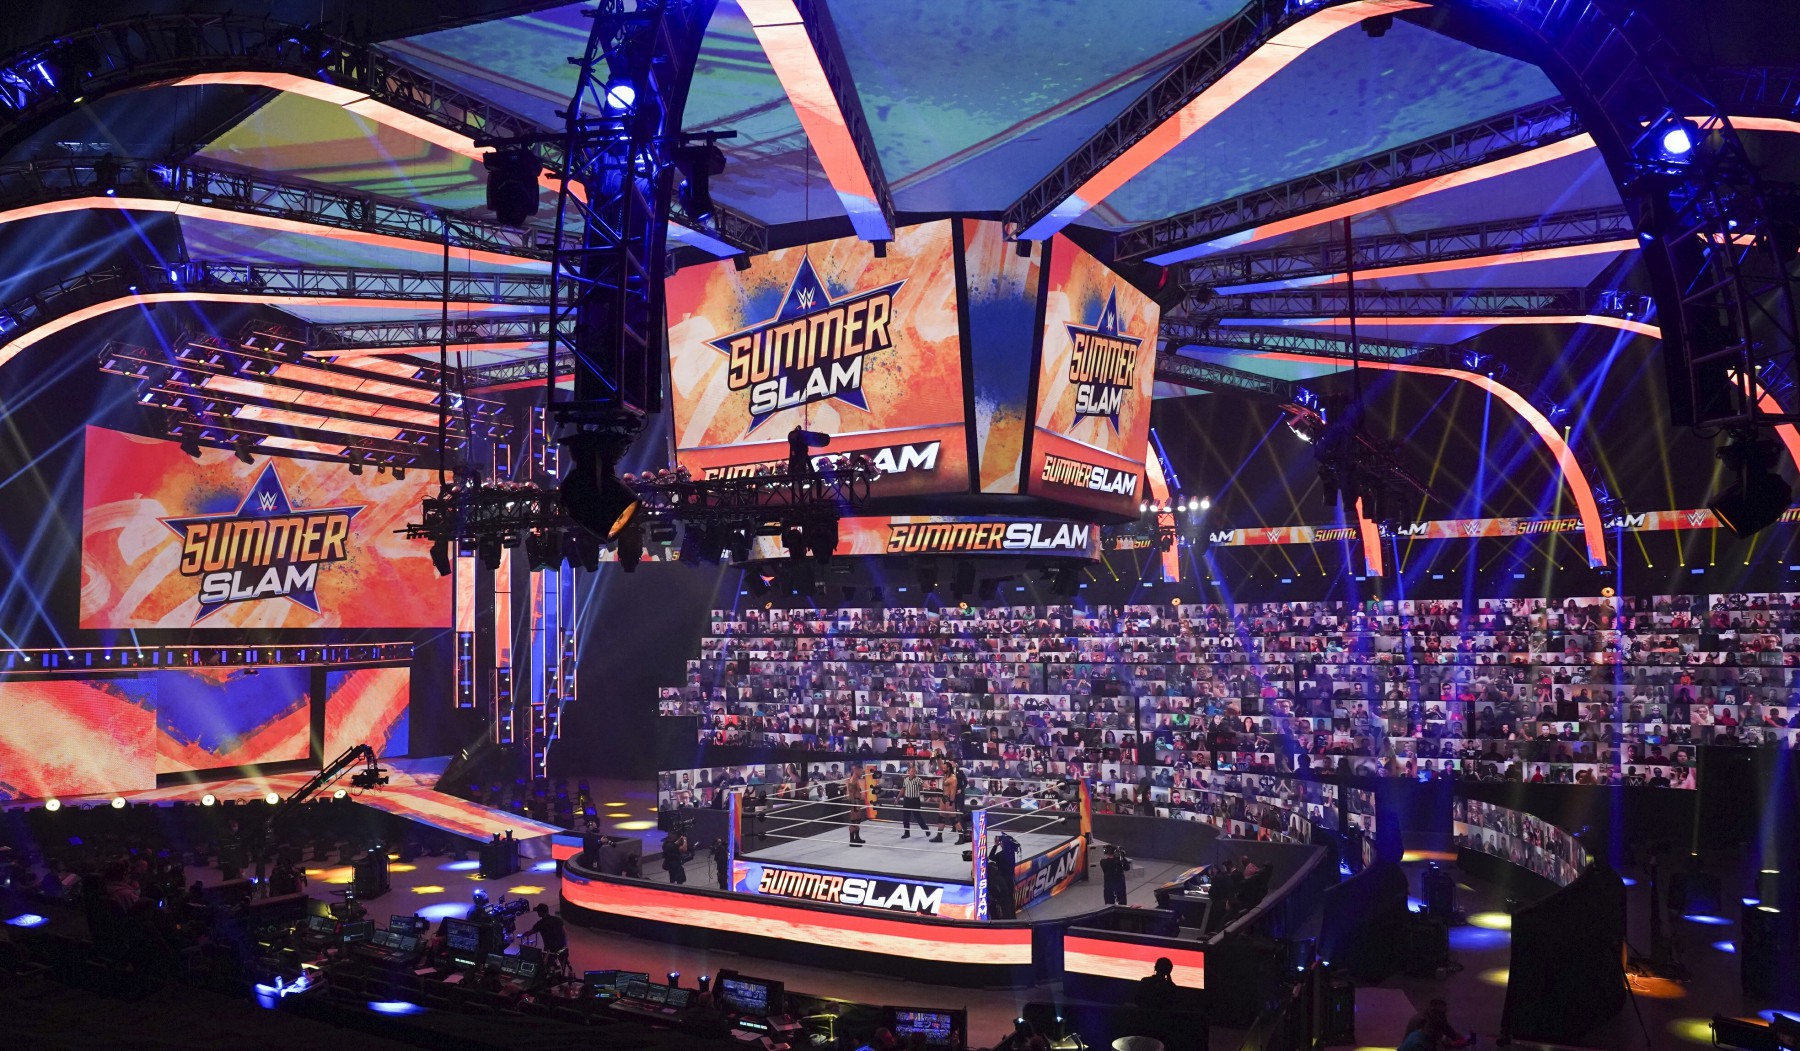 SummerSlam 2020 at the WWE ThunderDome